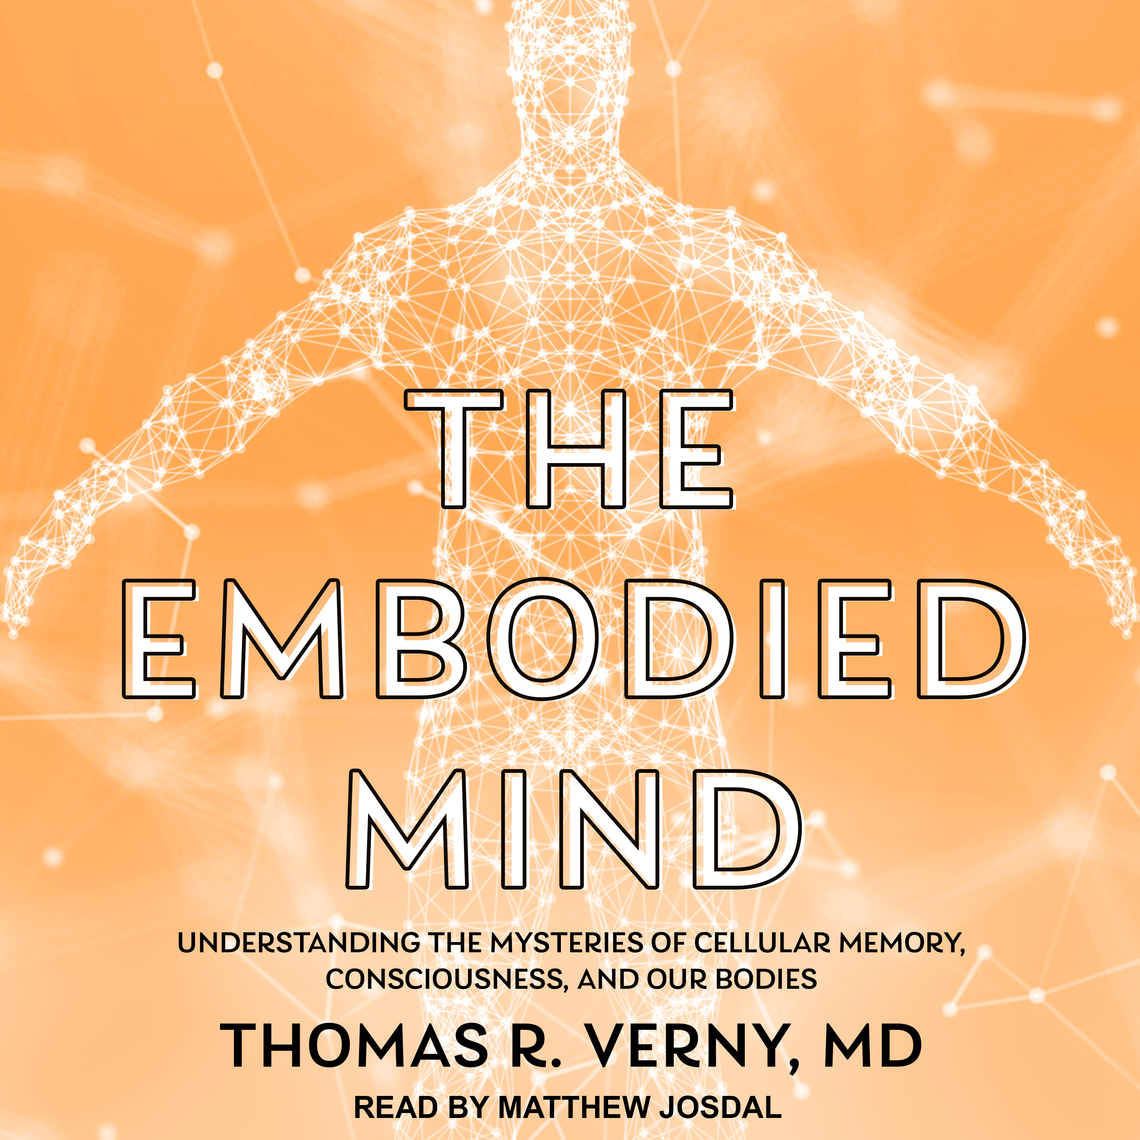 Embodied　by　Audiobook　Verny　Everand　Thomas　Mind　The　R.